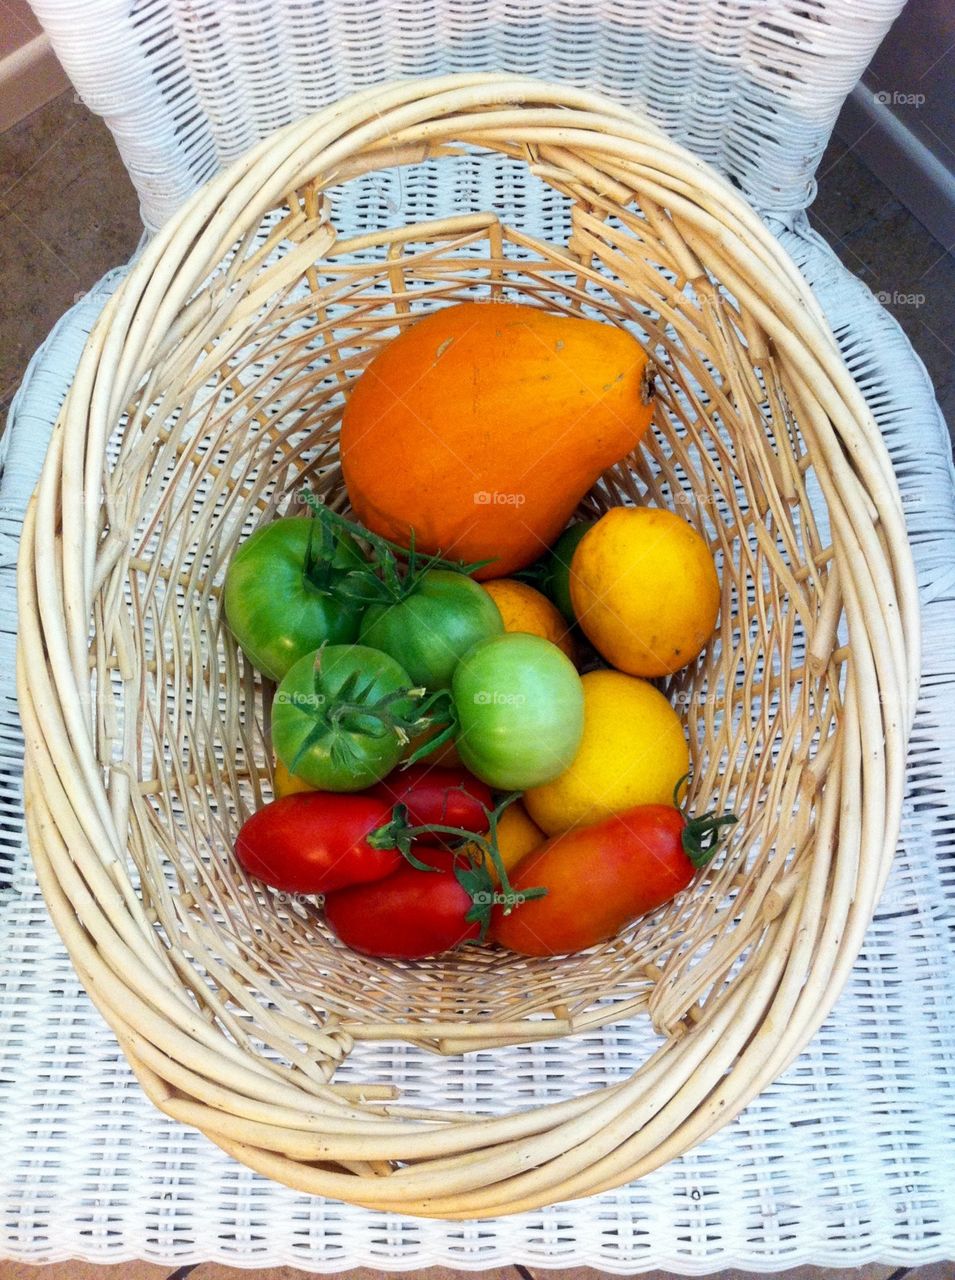 a lovely basket of veggies and fruit given by my neighbor frm